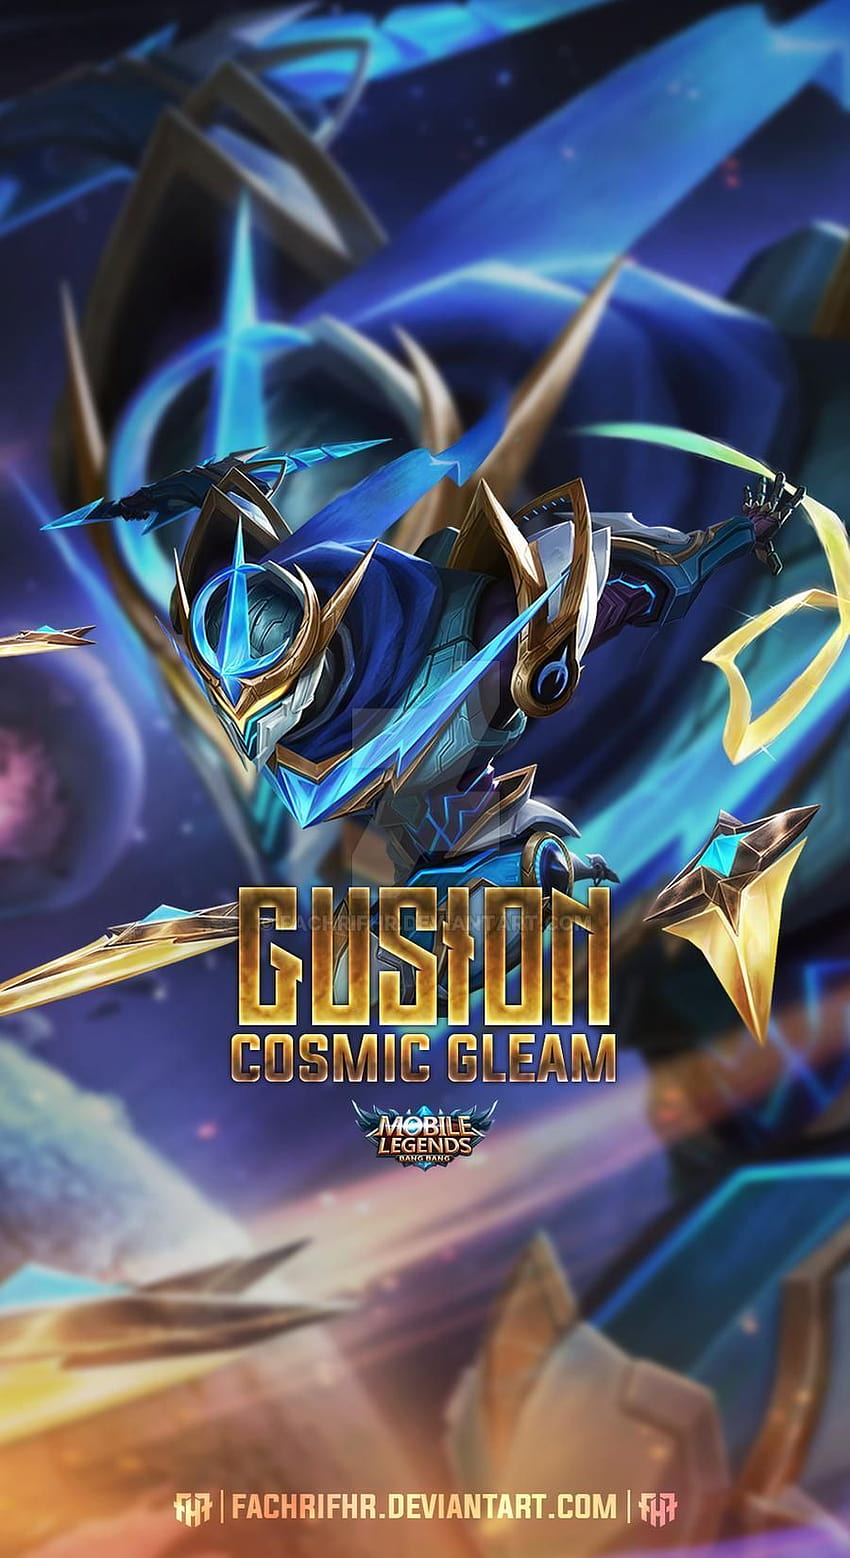 Gusion Cosmic Gleam by FachriFHR in 2020, gusion legend HD phone wallpaper